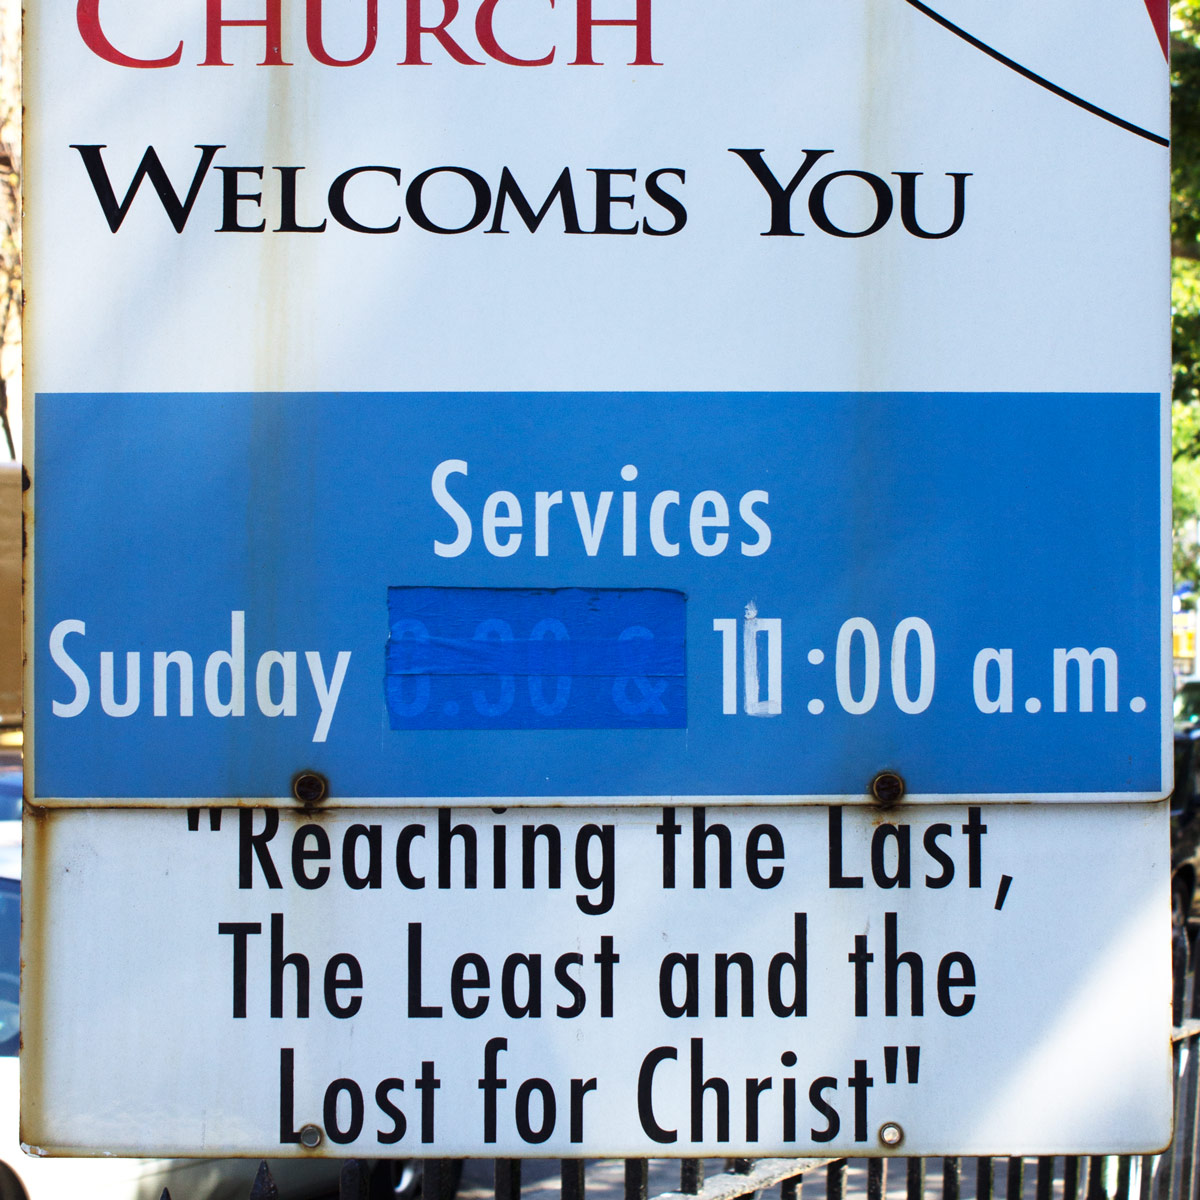 Church service sign where ‘8:30’ has been taped over and ‘10:00’ has been painted over so that it now reads ‘11:00’